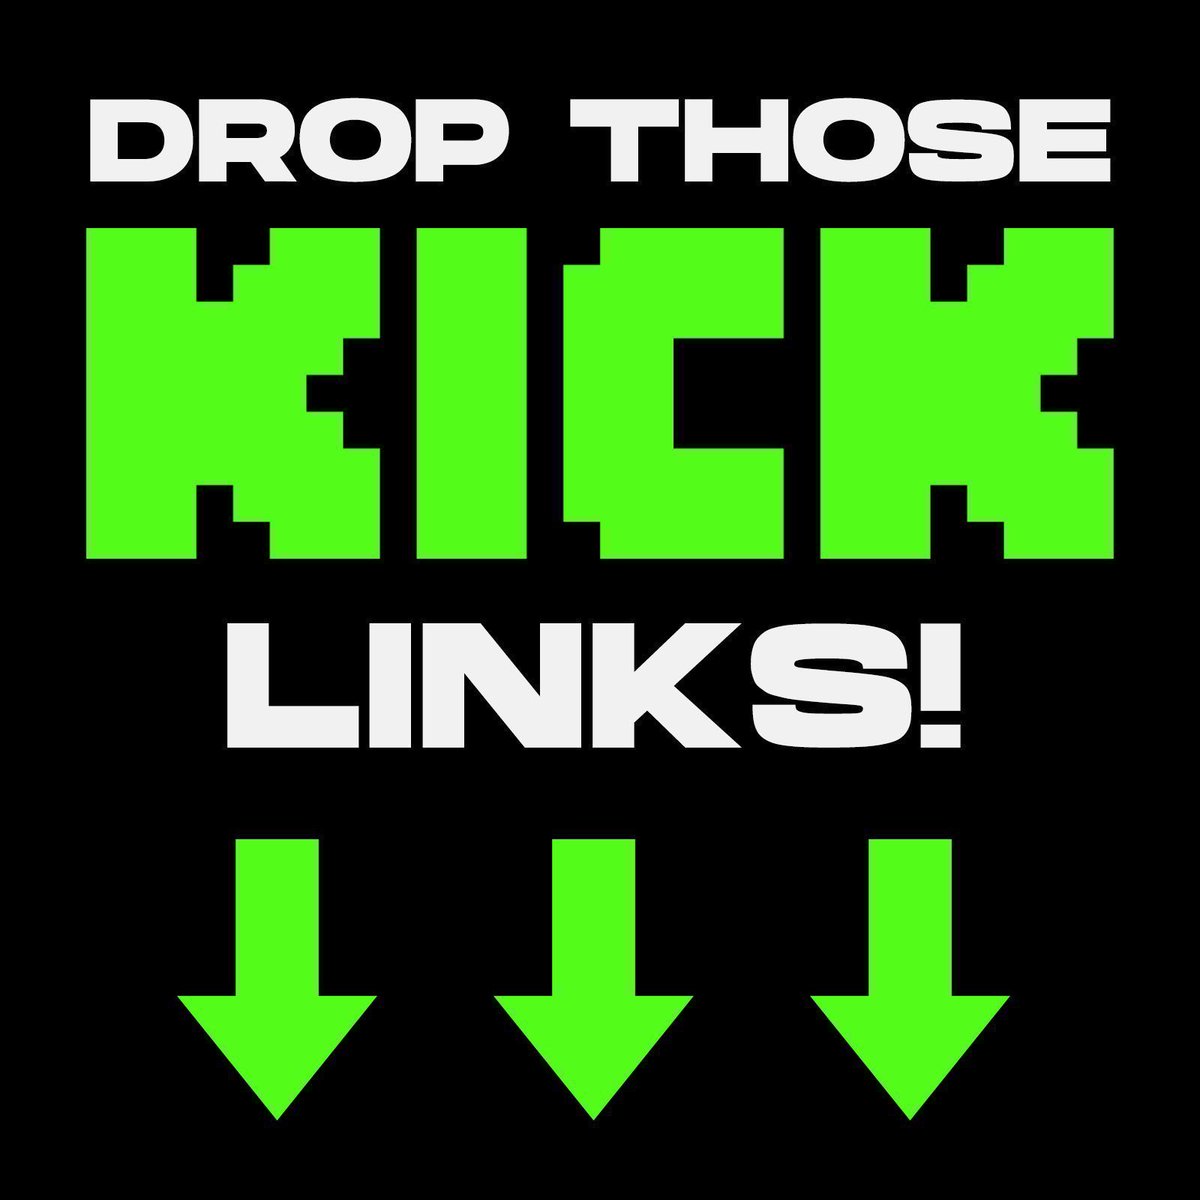 🚨 ATTENTION WHOS TRYING TO GET TO AFFLIATE AND BEYOND🚨 

Comment your Kick ✅ 

Follow each other ✅ 

Like and RT this tweet ✅ 

Follow us for Daily gains ✅

Follow Kick.com/Fuego_6

Check each other out ✅

#KickStreamer #KickStreaming #Kick #KickArmy